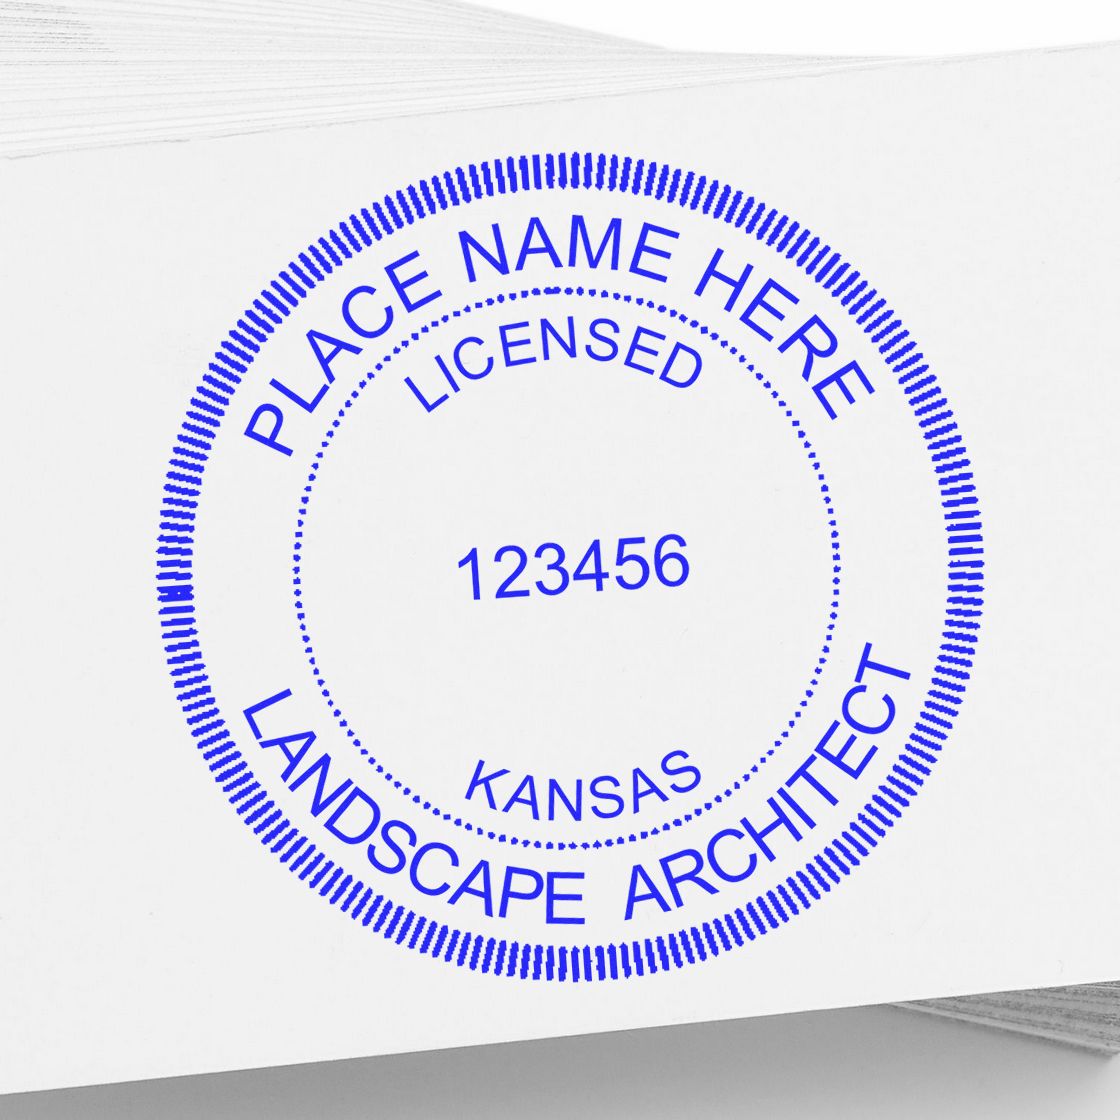 The Premium MaxLight Pre-Inked Kansas Landscape Architectural Stamp stamp impression comes to life with a crisp, detailed photo on paper - showcasing true professional quality.